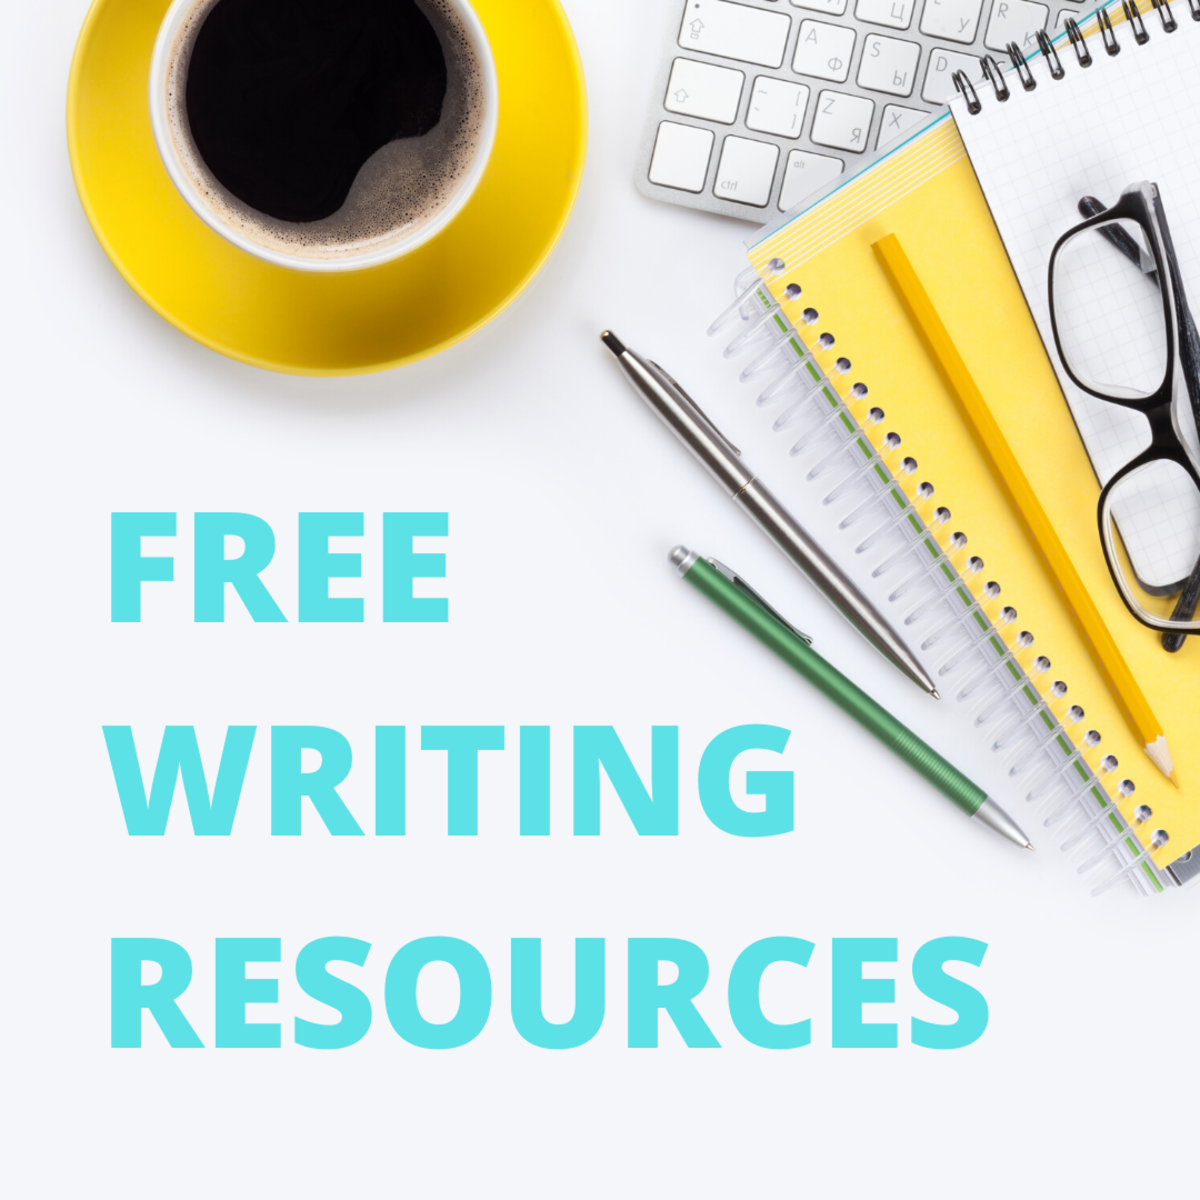 FREE WRITING RESOURCES